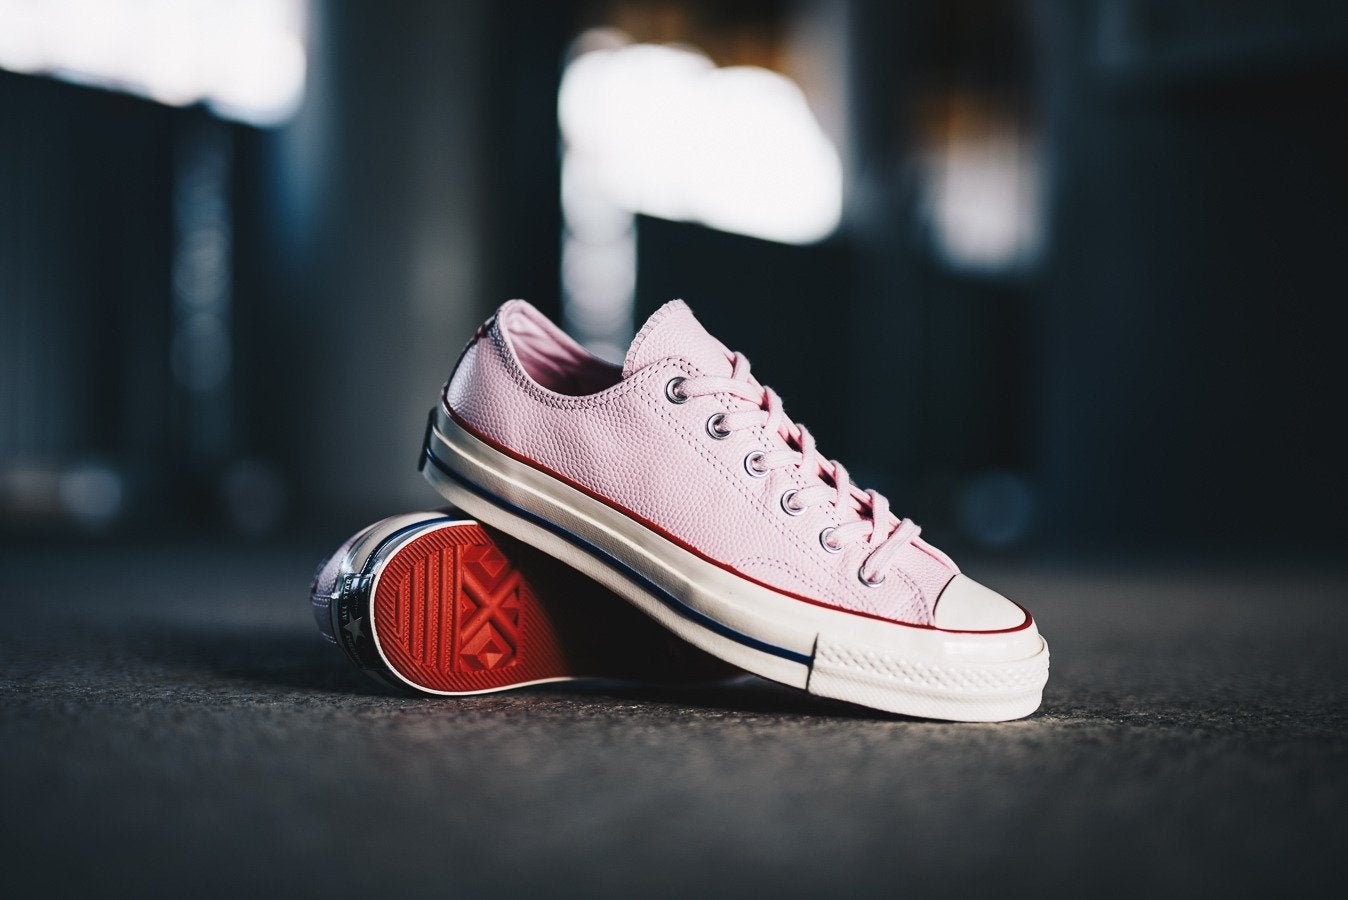 Pink Leather 70s Valentine Low Top Chuck Taylor All Star w/ Swarovski Bling Wedding Kicks Bride Sneakers Shoes